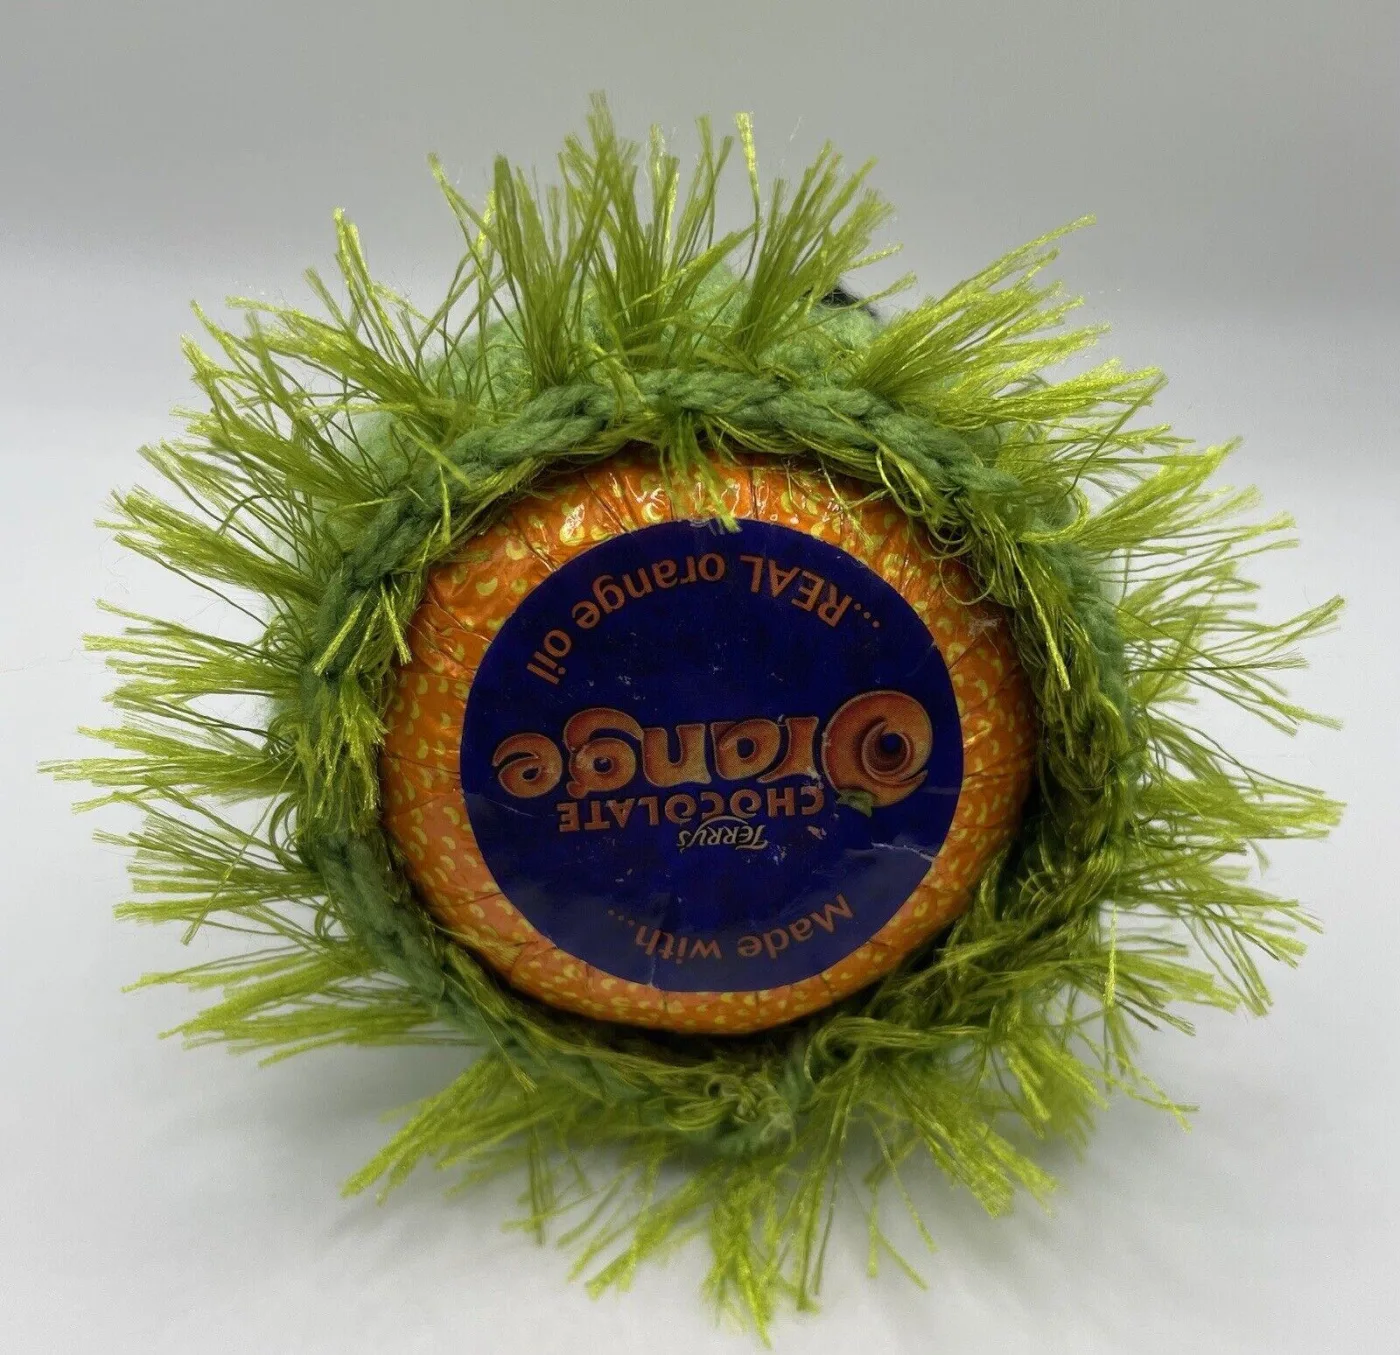 The grinch chocolate orange cover underneath